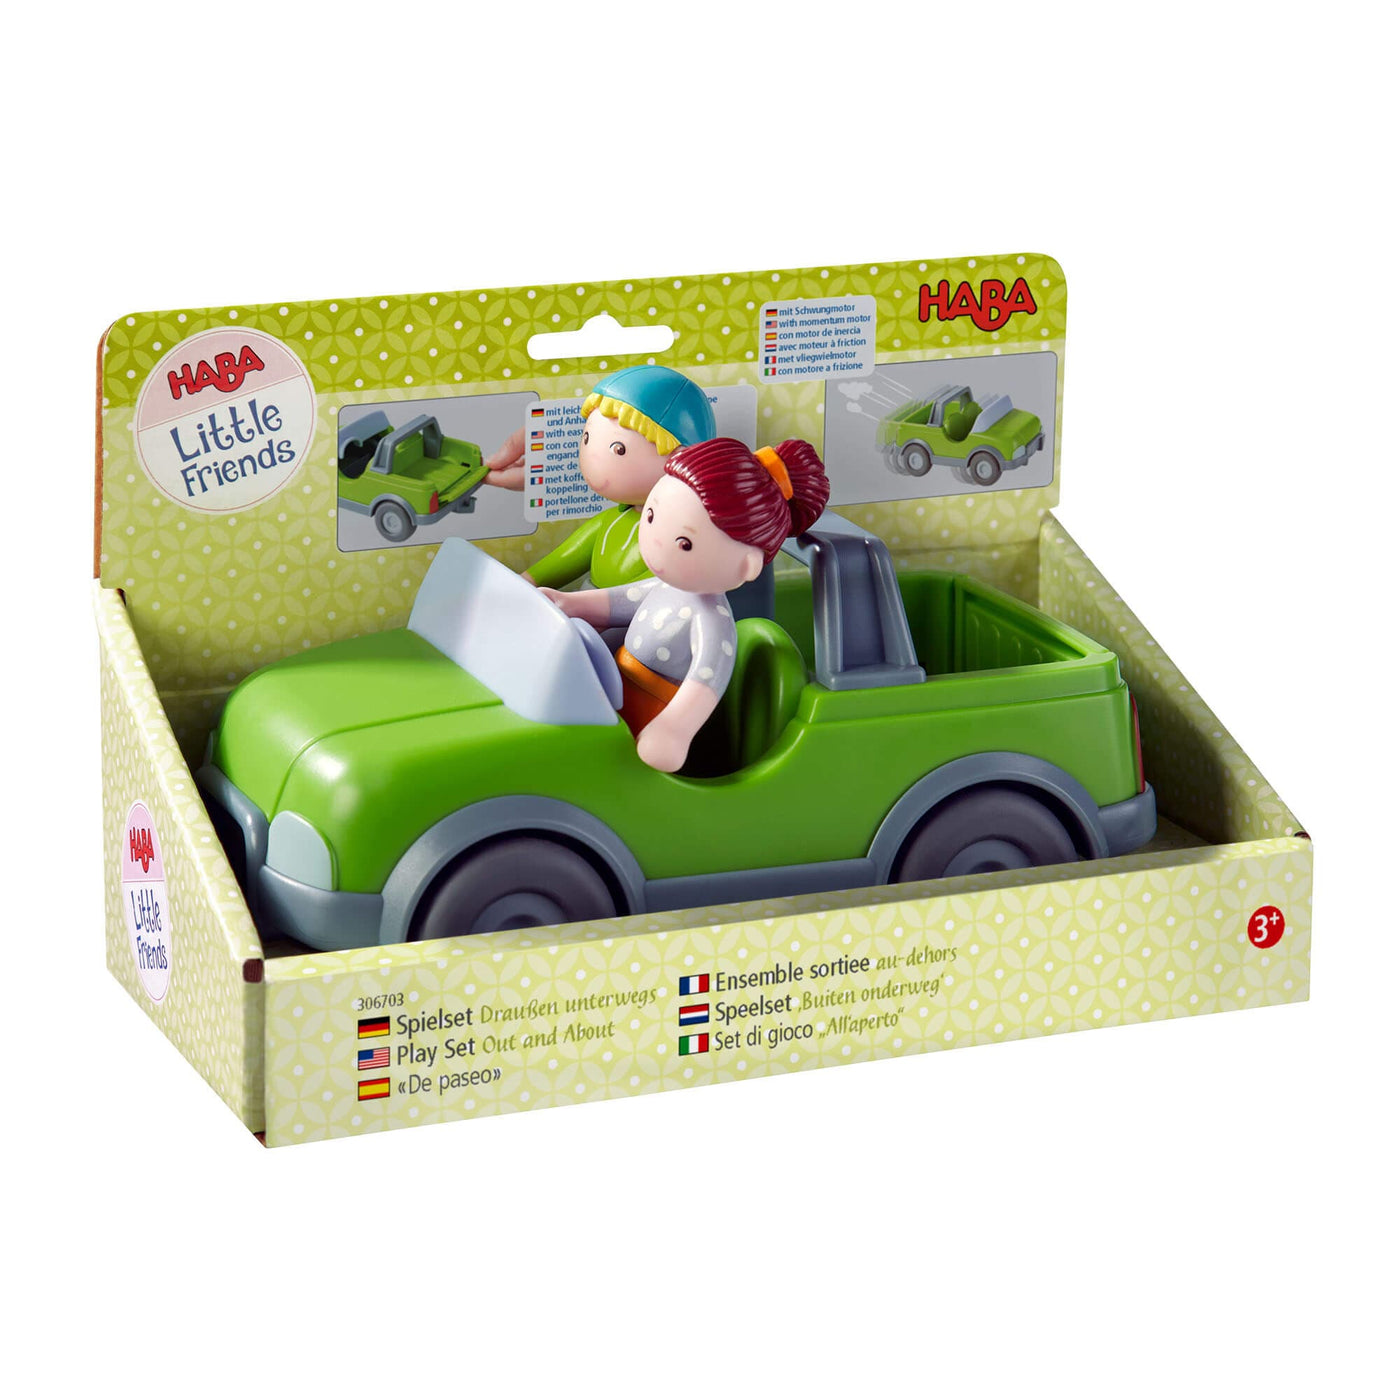 Little Friends Out and About Playset - HABA USA